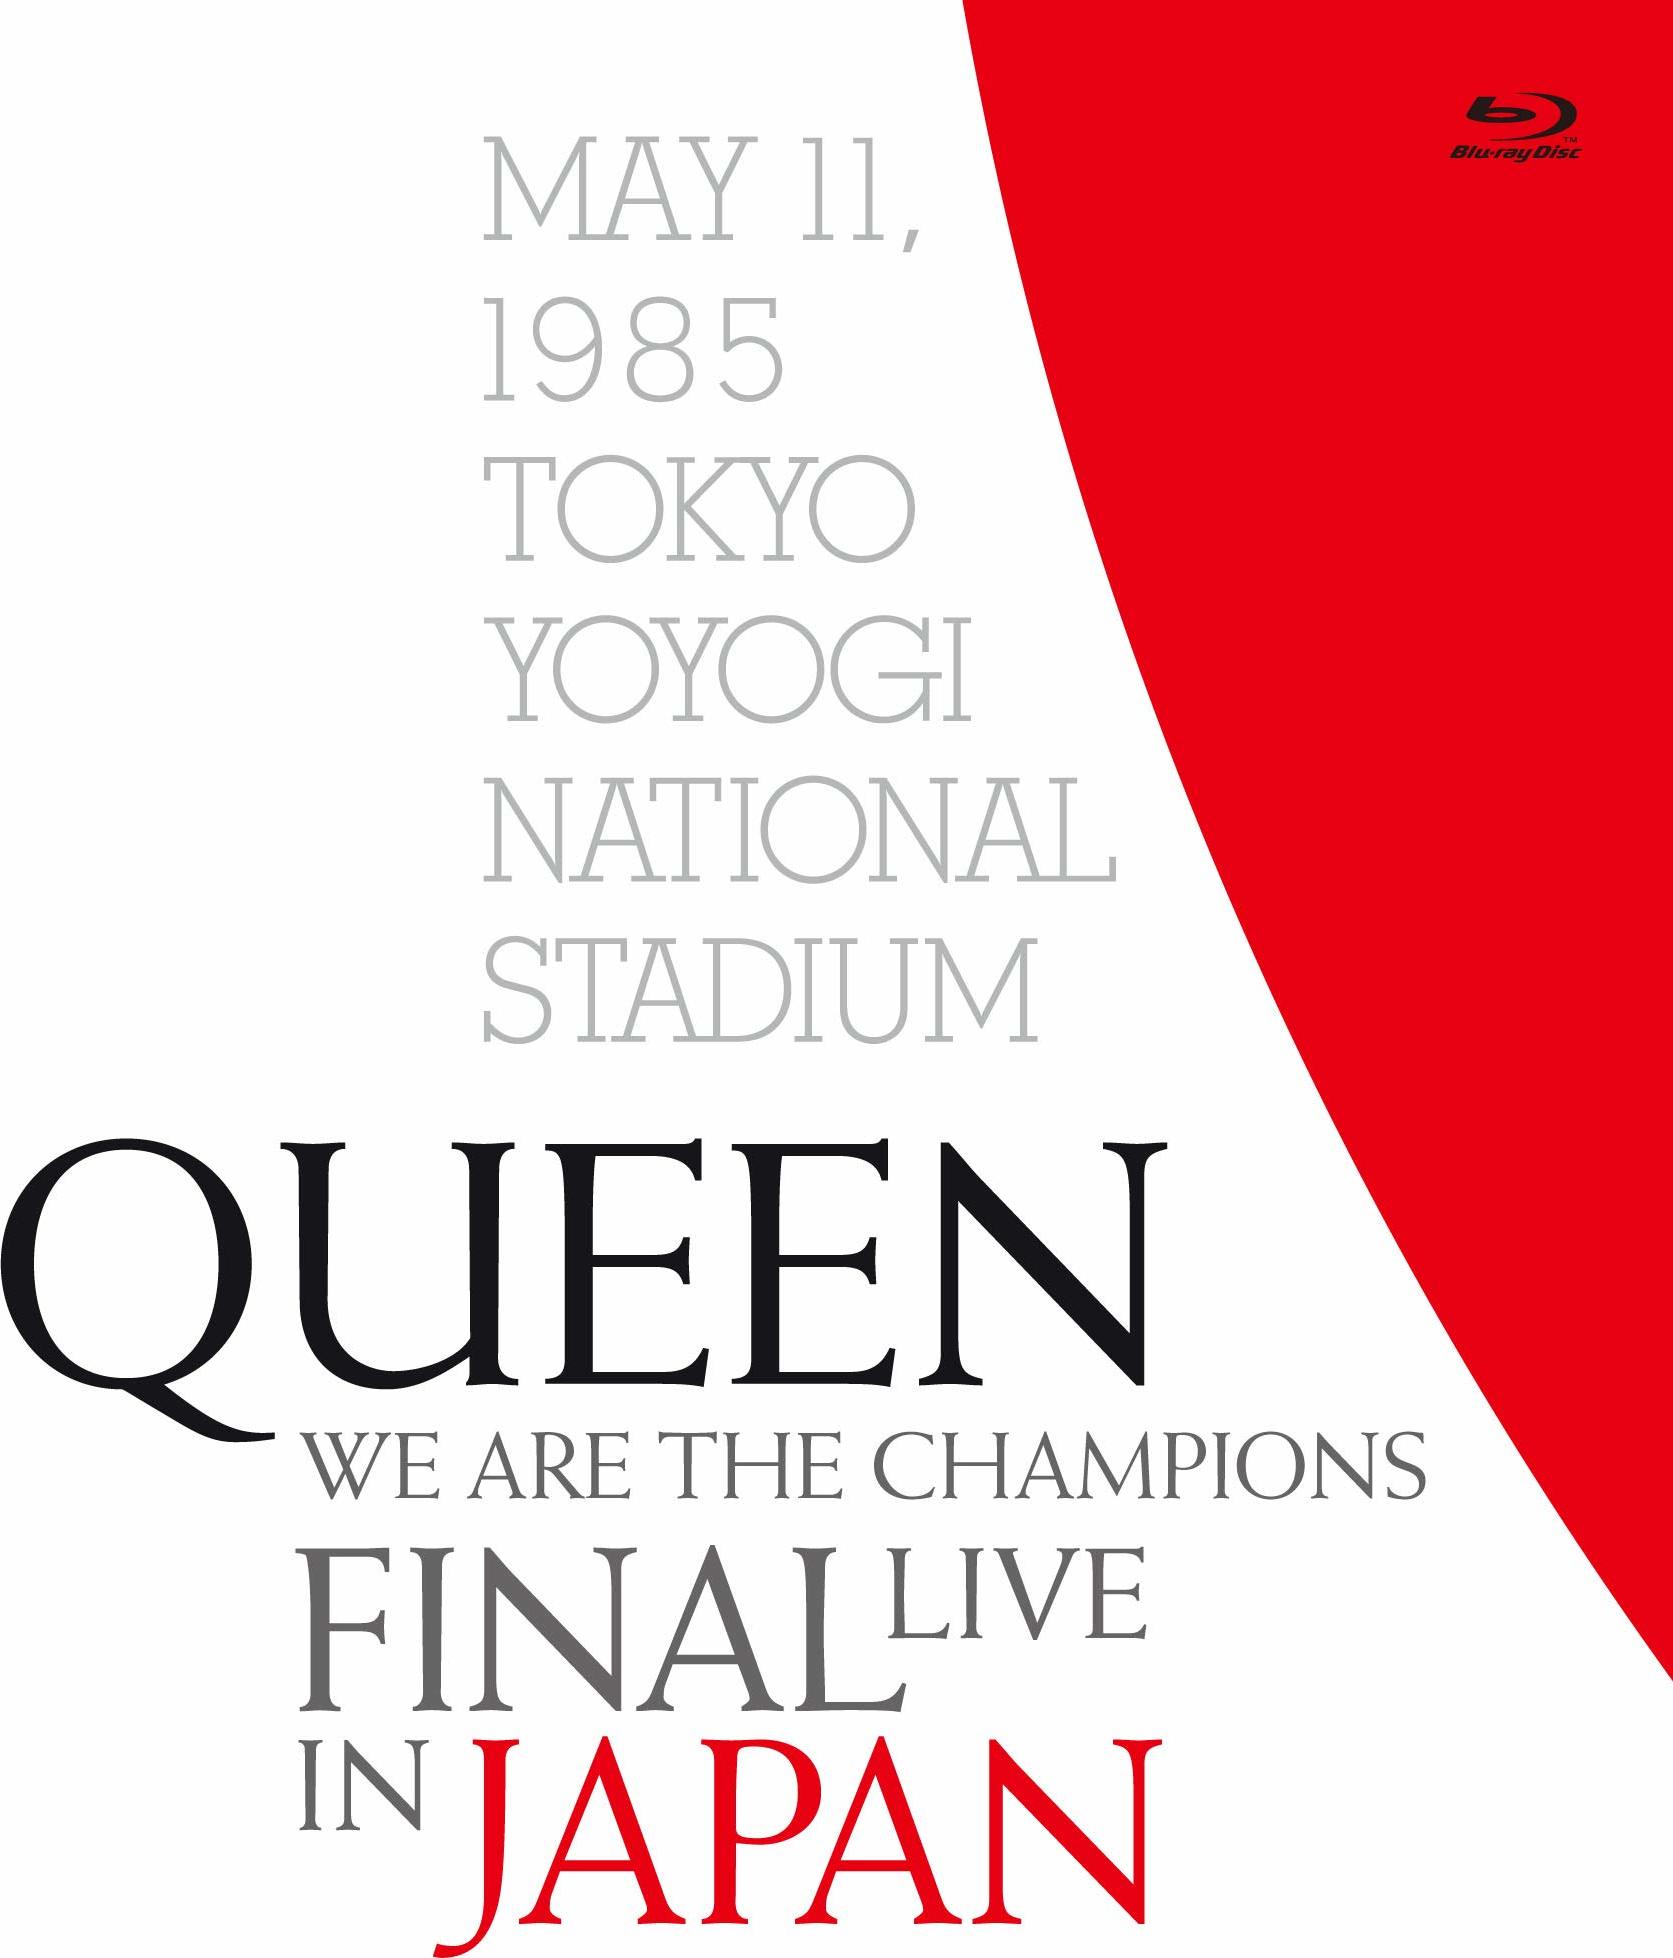 Queen - We Are The Champions: Final Live In Japan (2019) Blu-ray 1080i LPCM 2.0